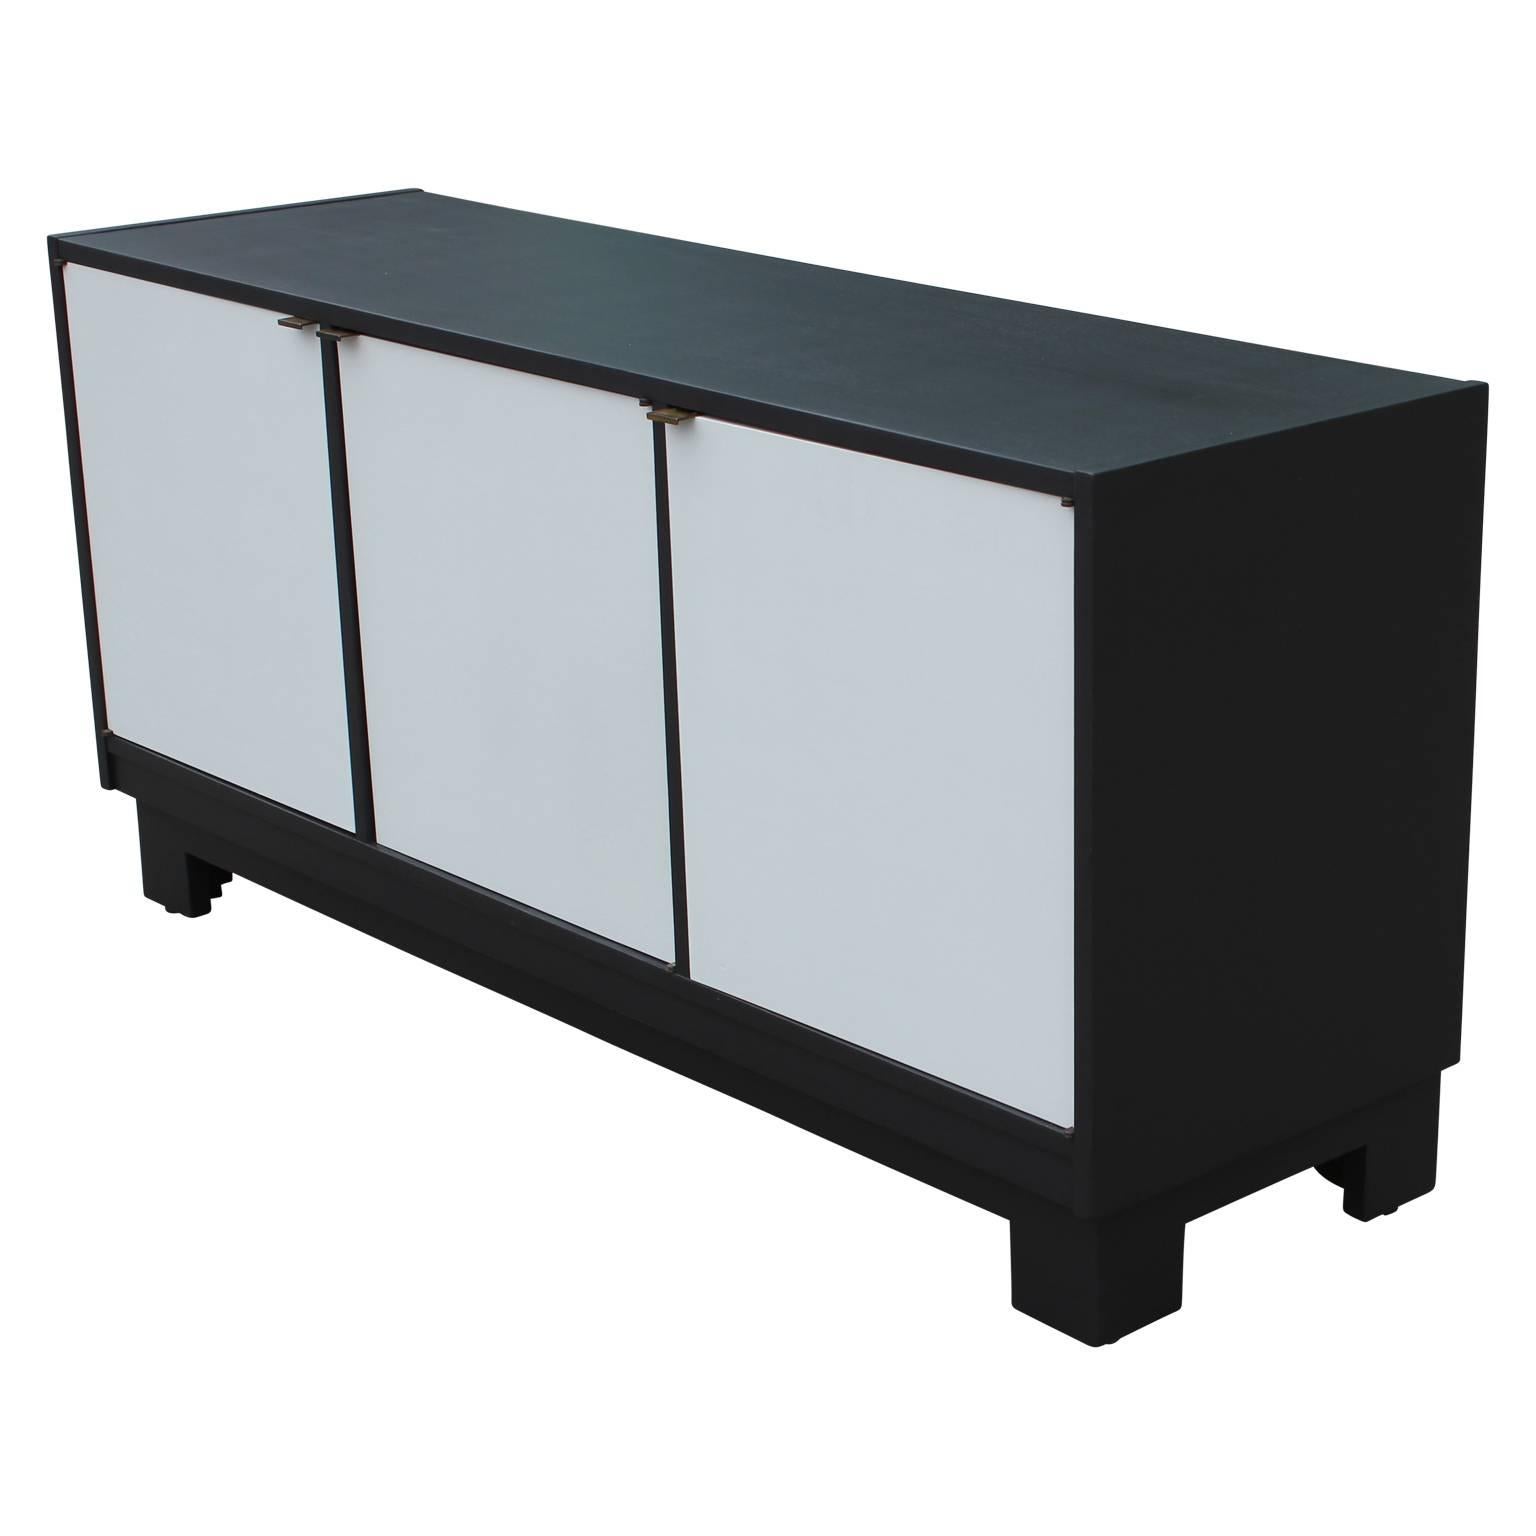 Modern Minimalist charcoal and grey credenza with brass hardware. The two left doors open to reveal single drawers with ample cabinet space below. The door on the right opens to show a single shelf.